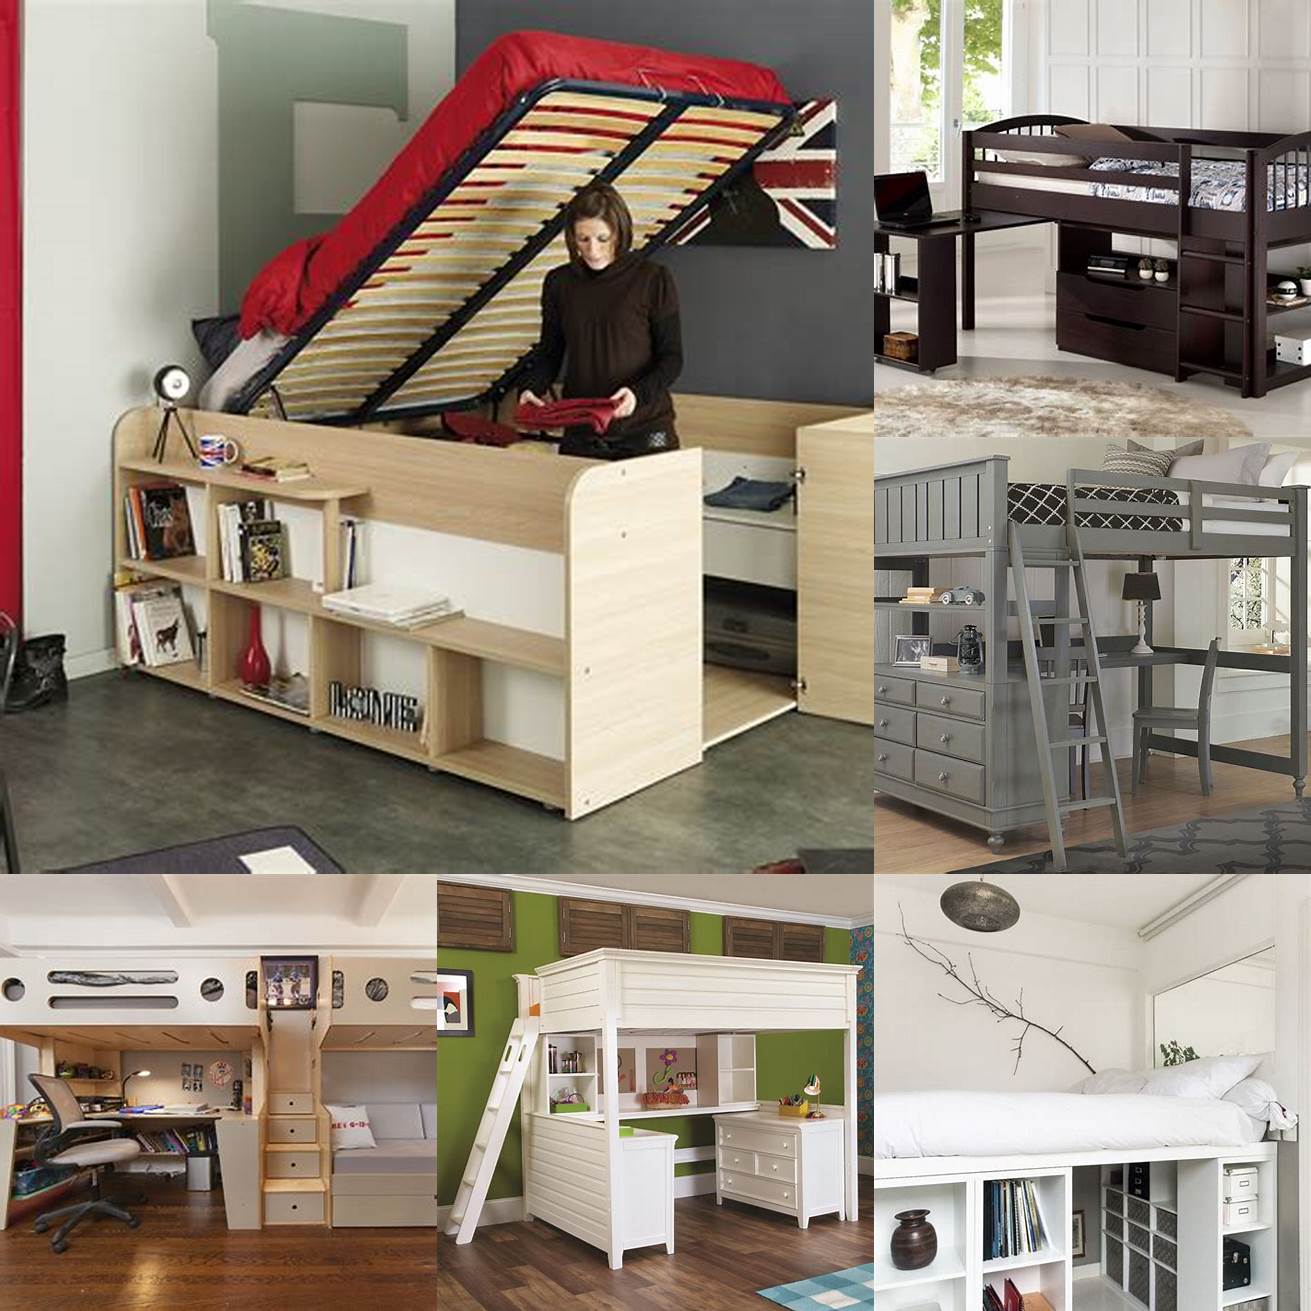 Consider if you need extra storage space and choose a Desk Bed with built-in storage if necessary